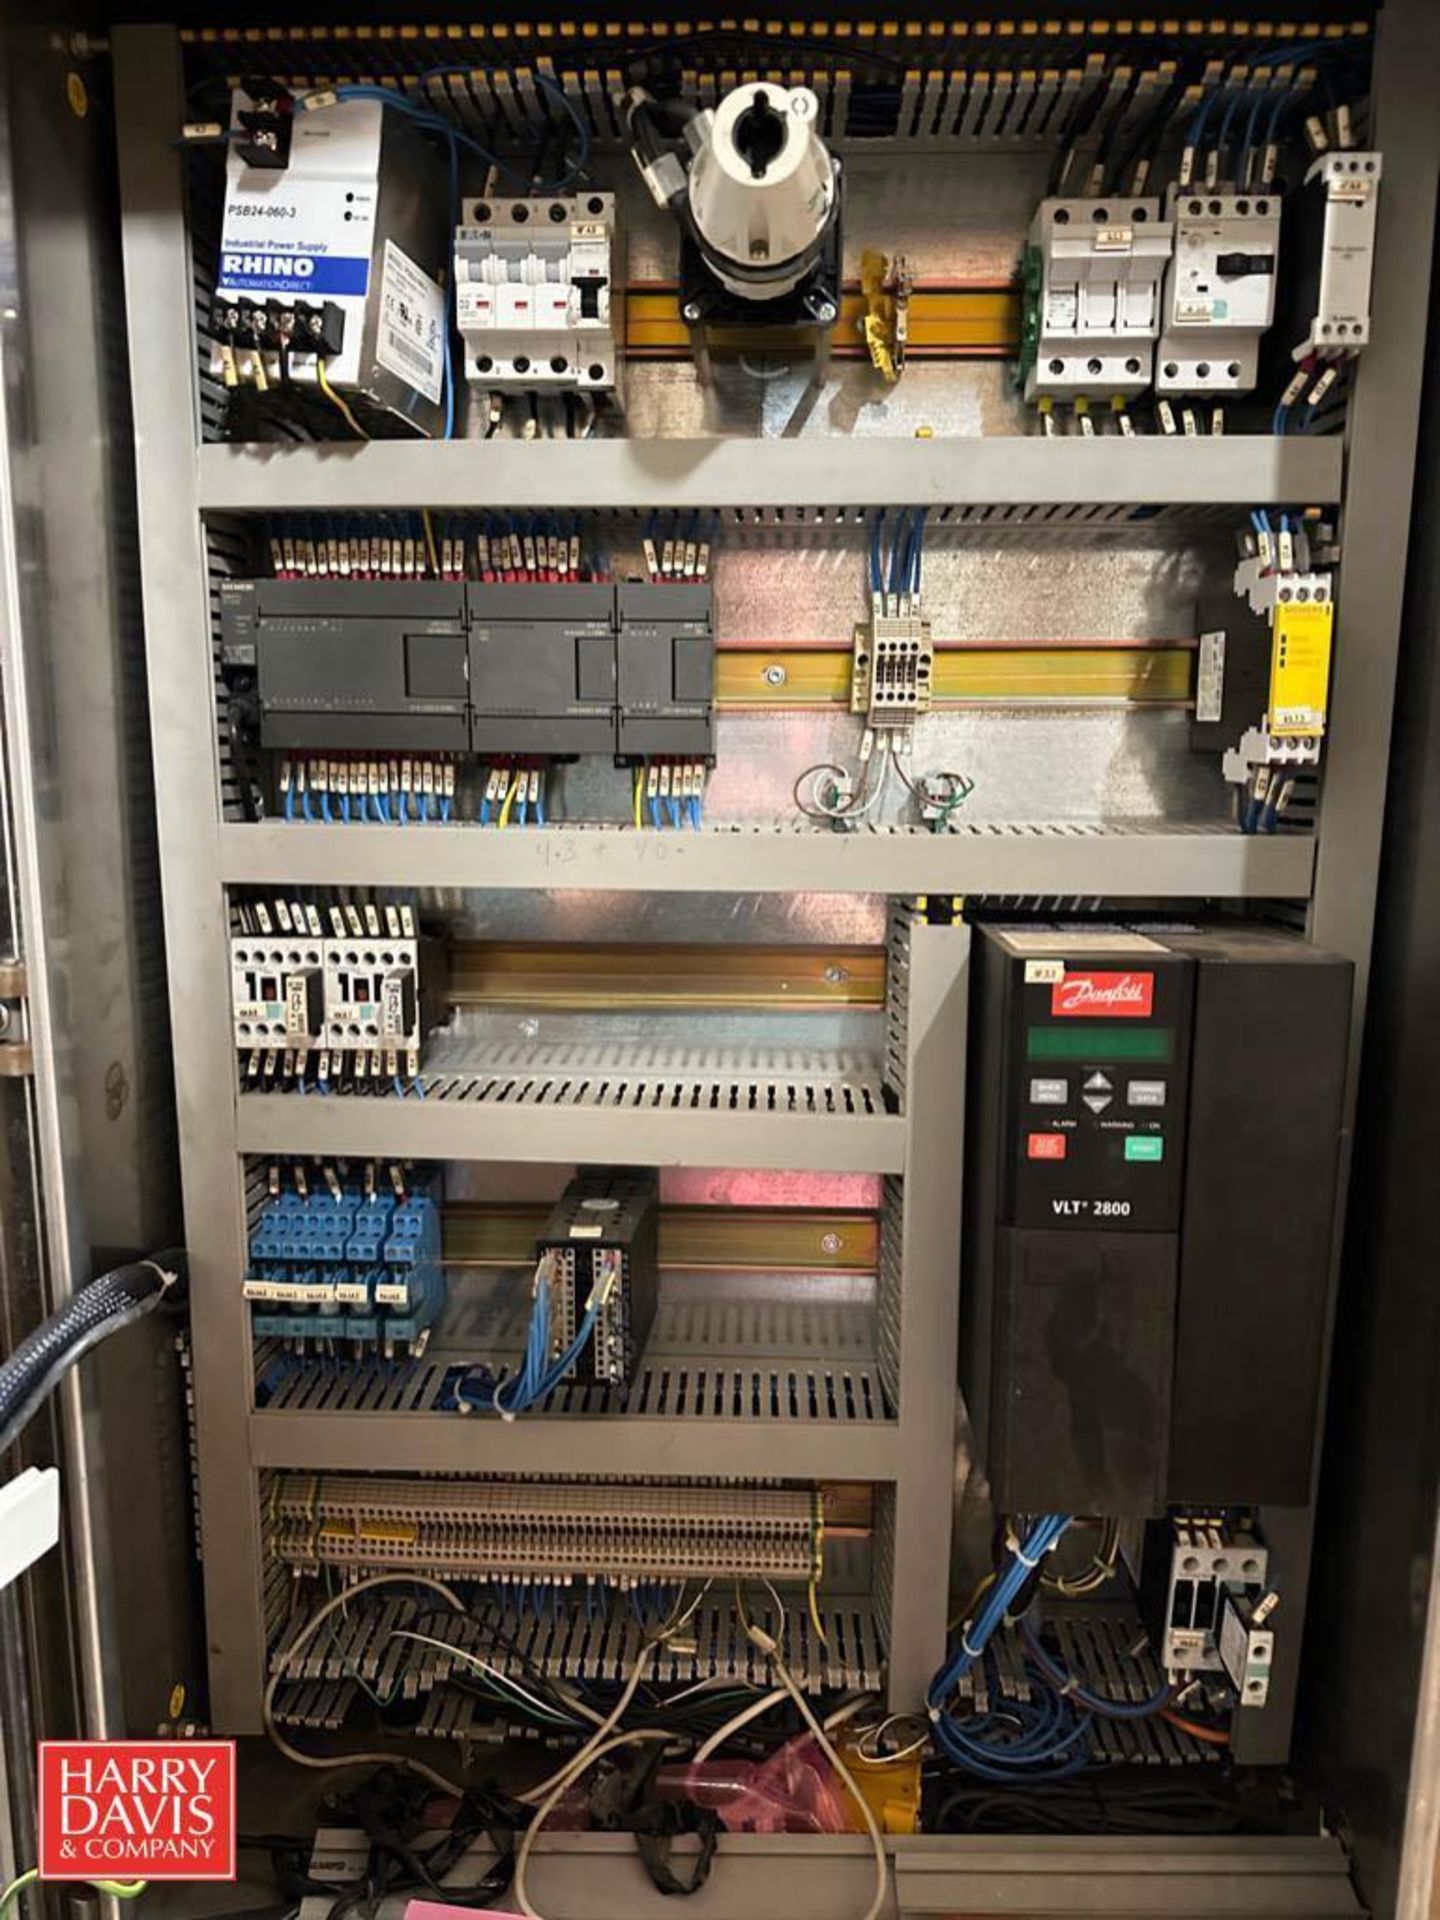 CMT S/S Batch Cooker with DanFoss VLT 2800 Variable-Frequency Drive, Siemens Simatic 57-200 PLC, Sim - Image 2 of 2